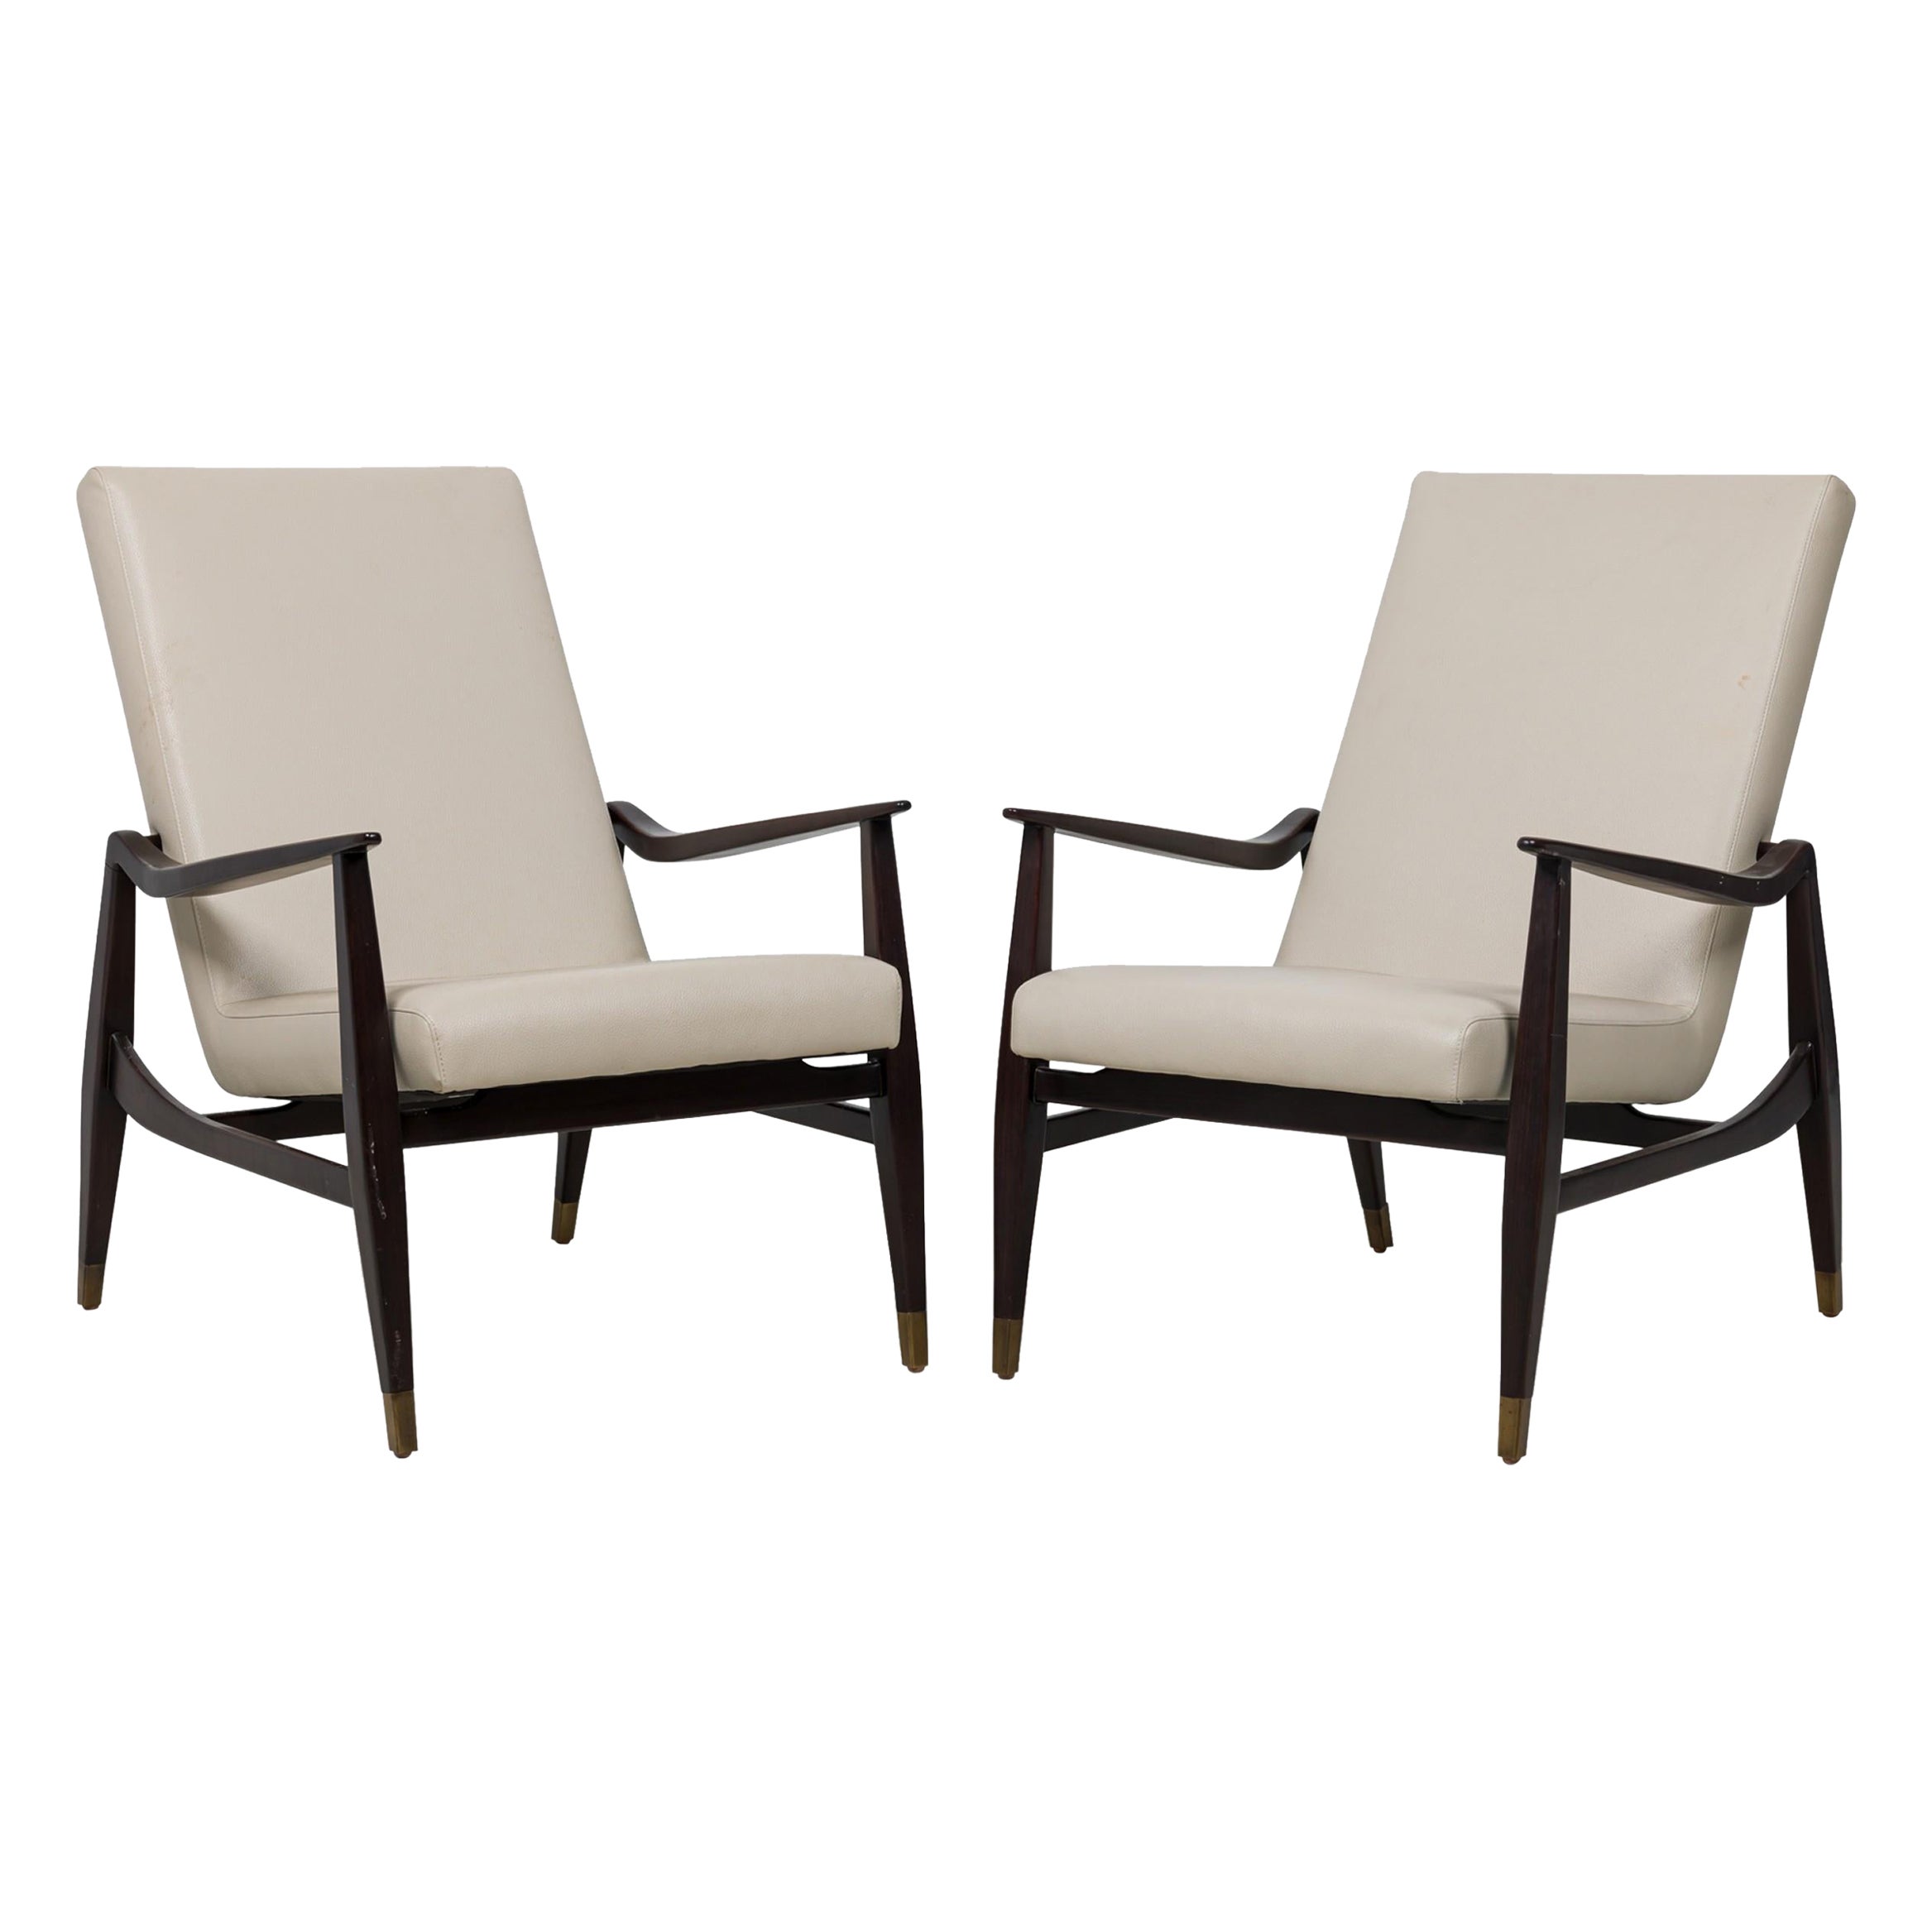 Pair of Contemporary American Beige Pebbled Leather Upholstered Armchairs For Sale